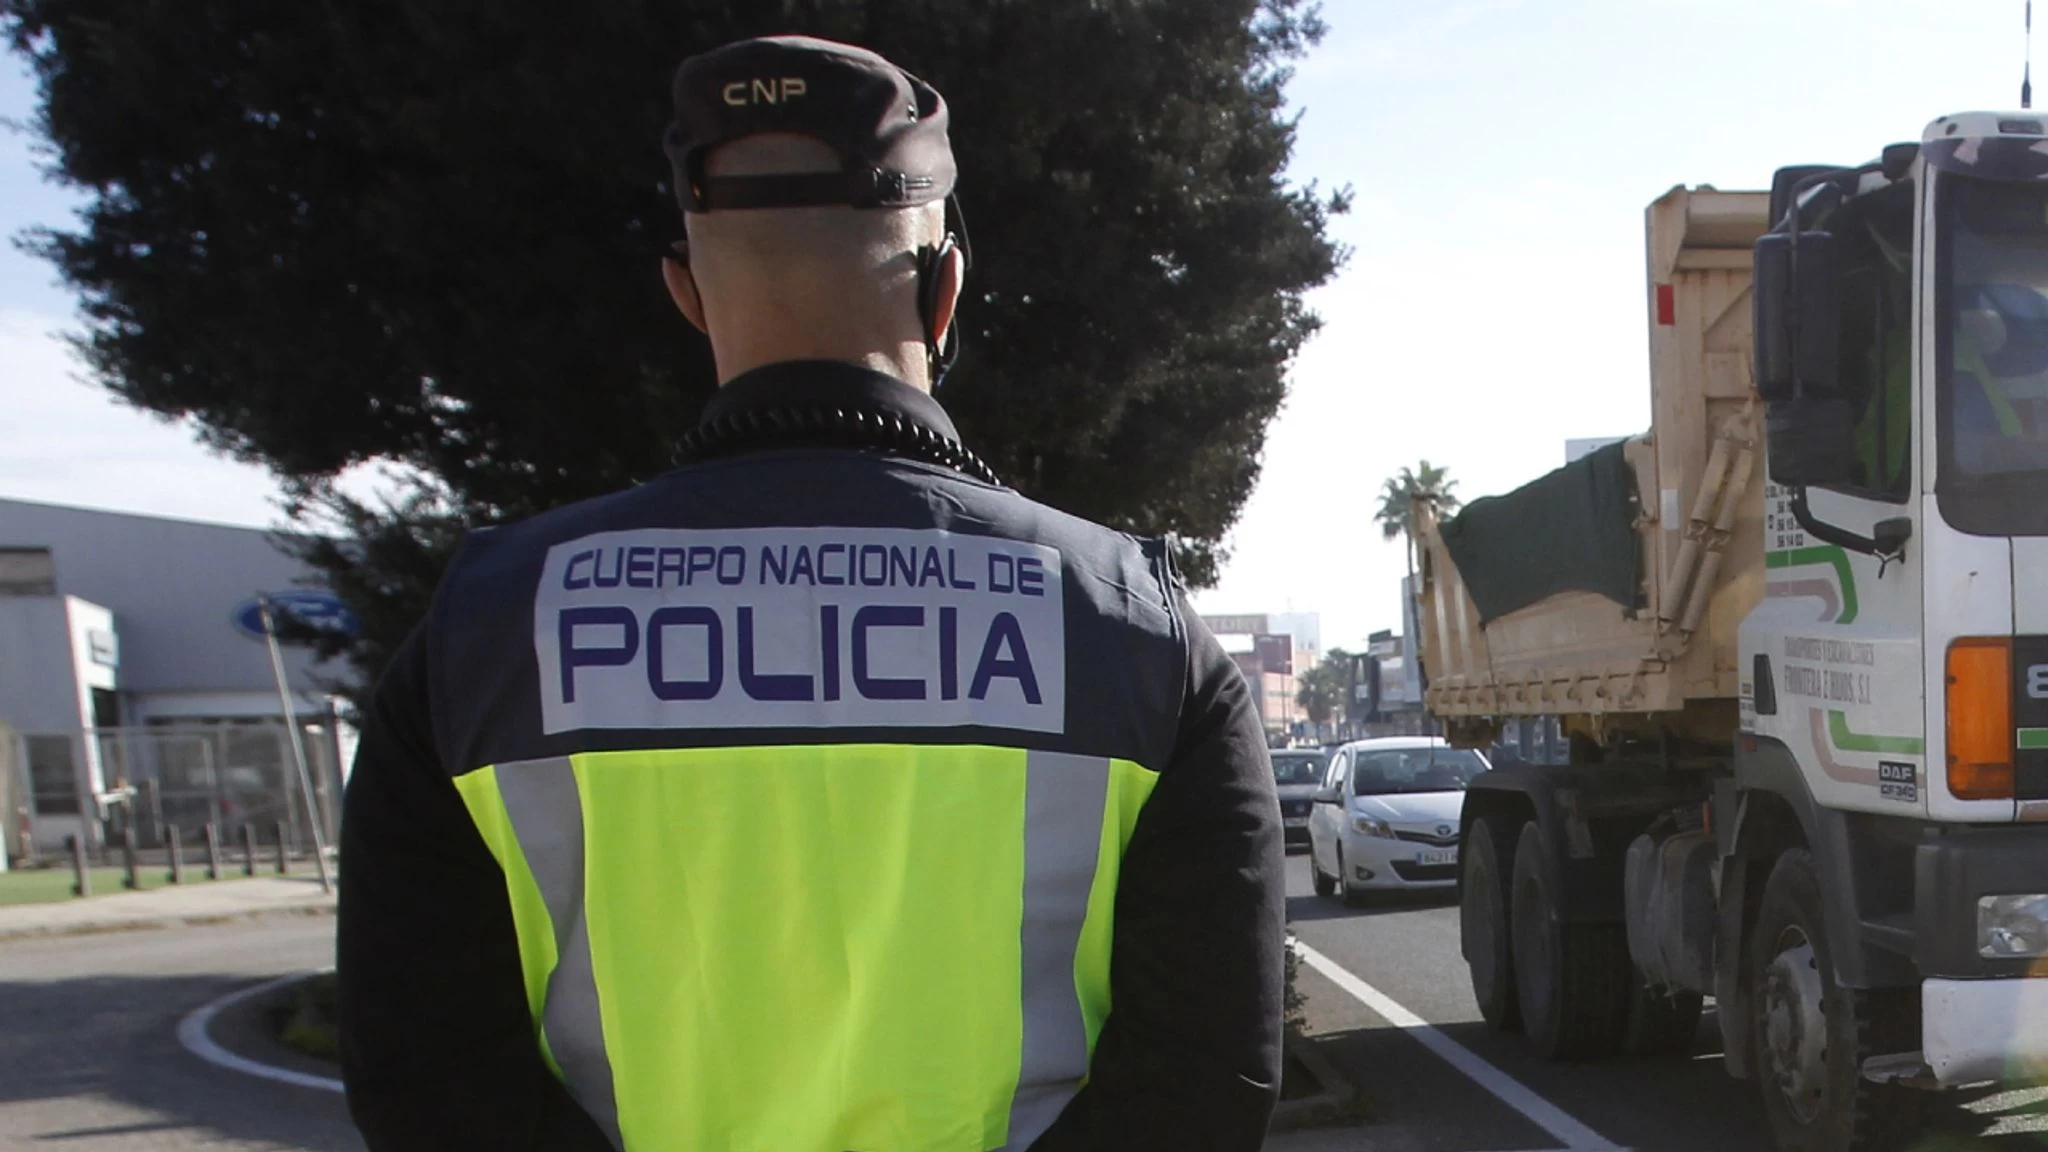 Spanish man arrested for allegedly infecting 22 people with coronavirus